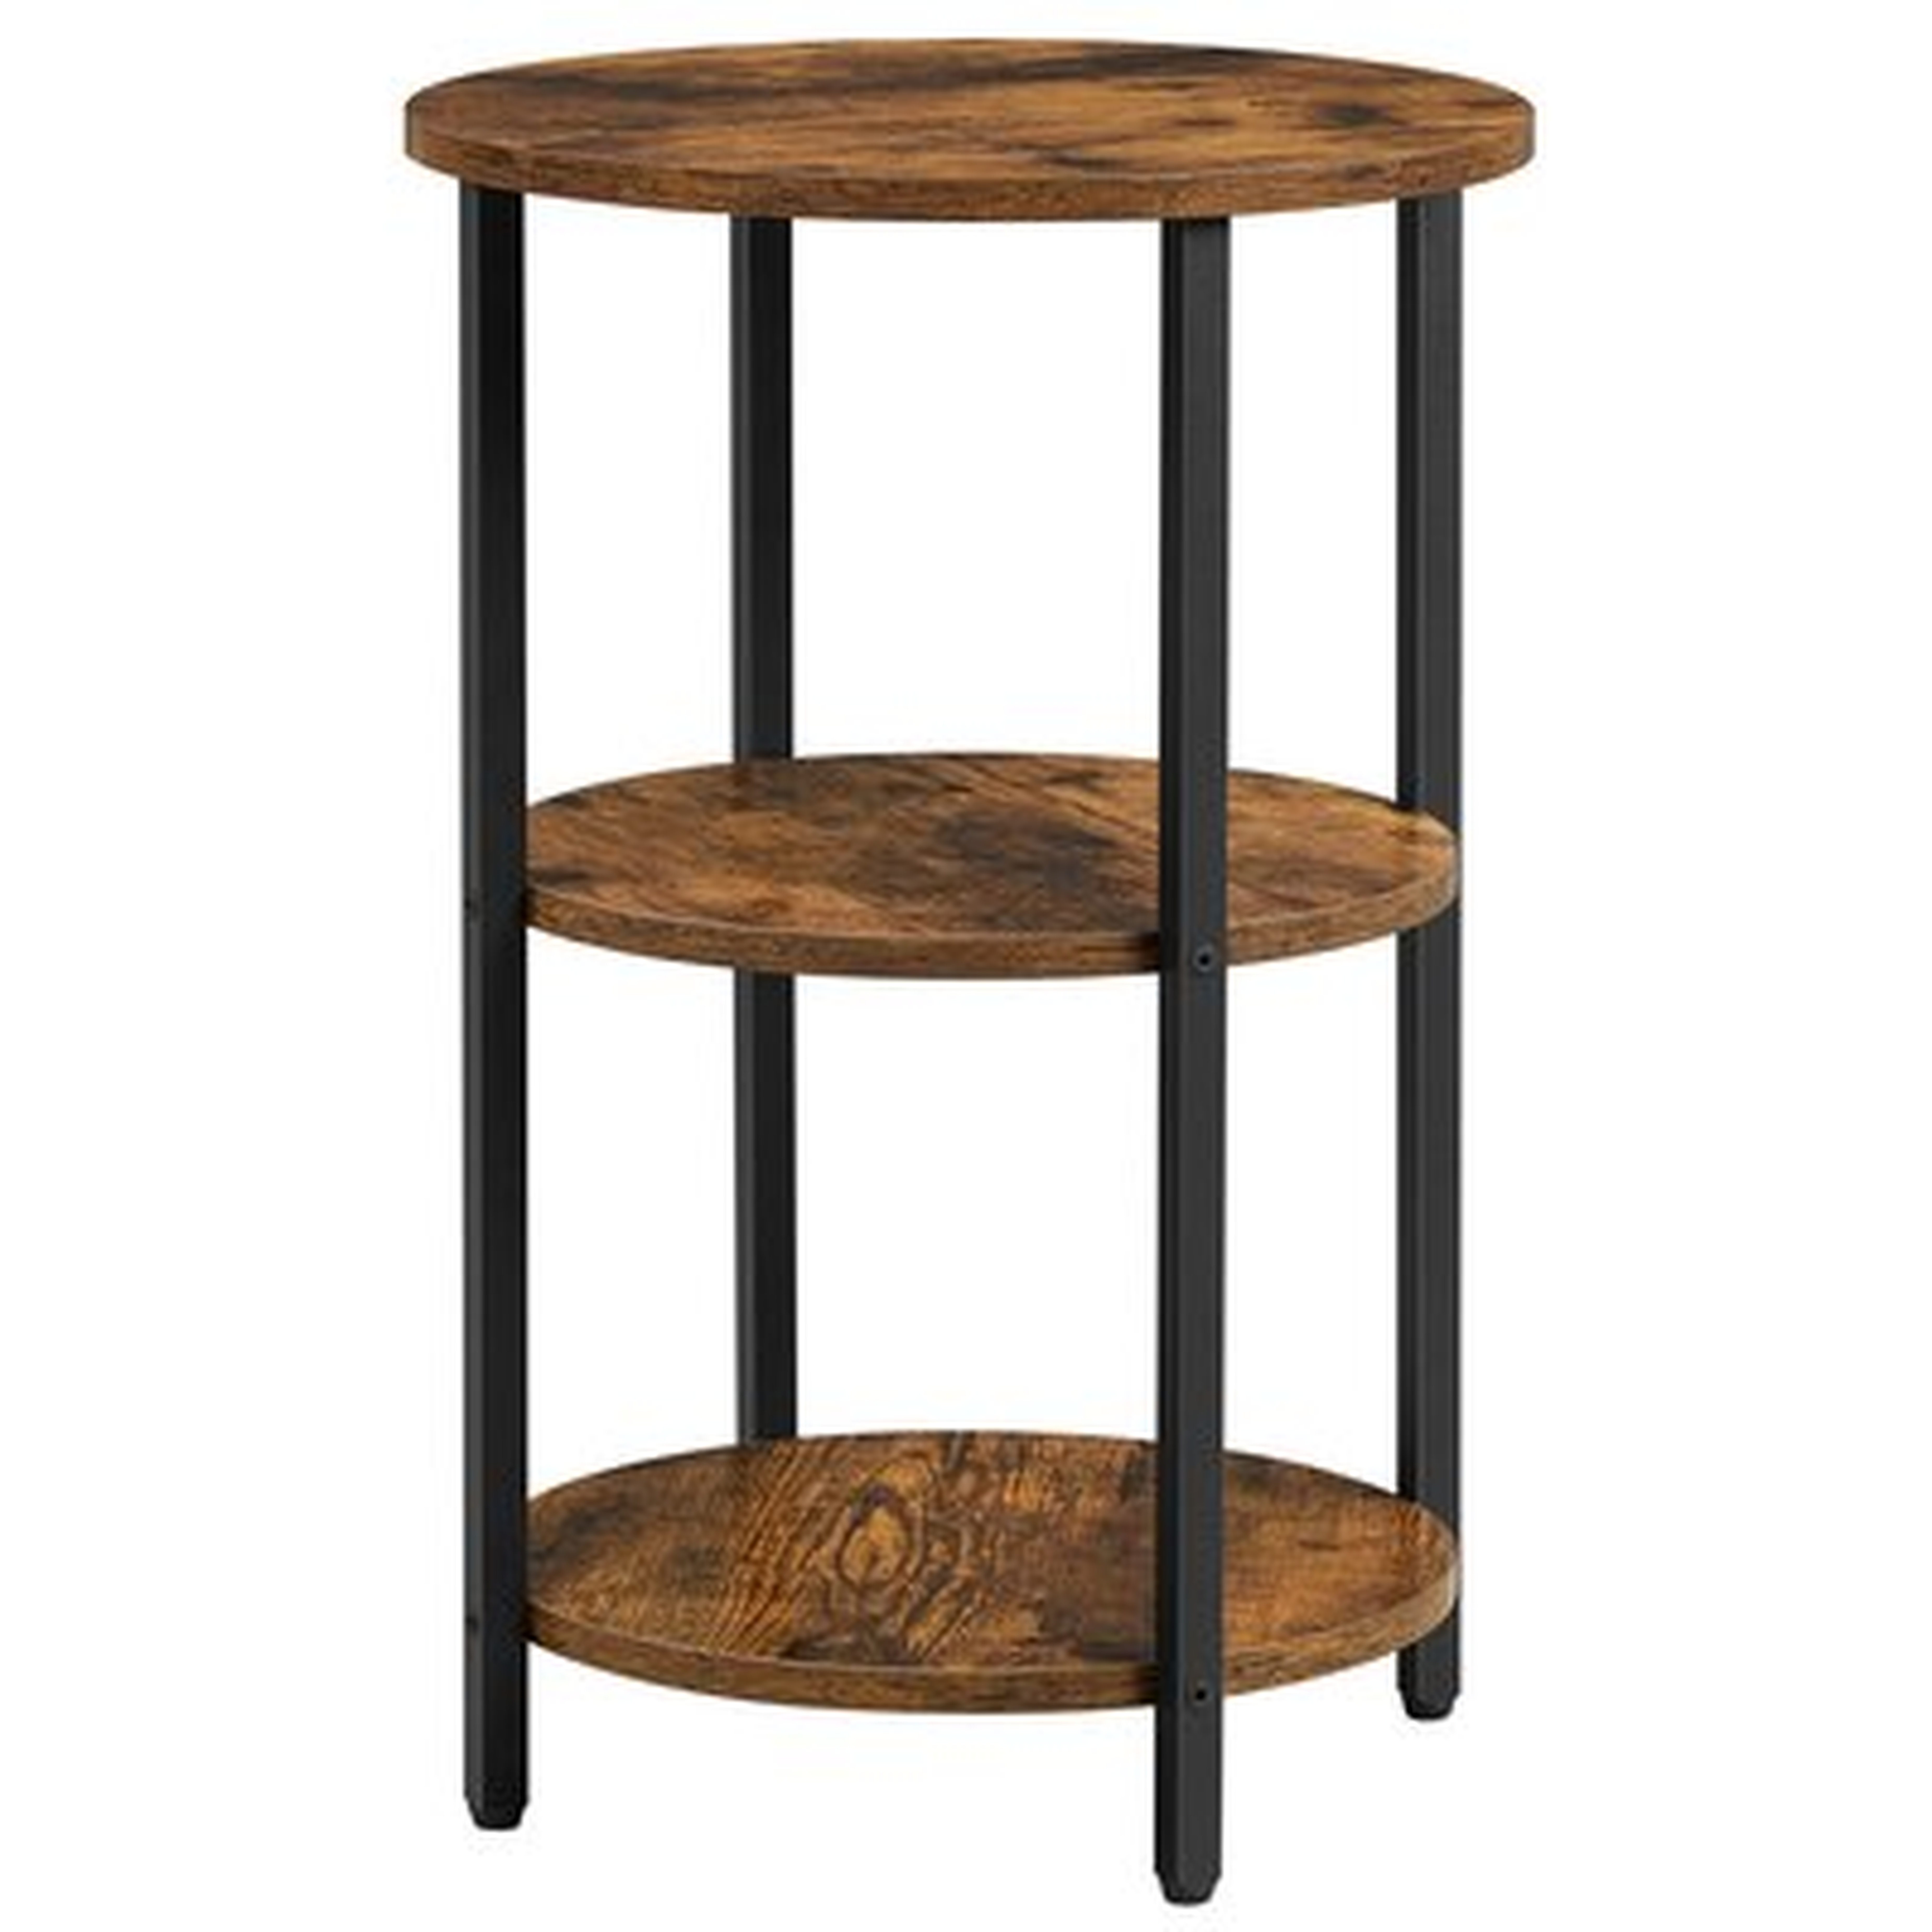 Sofa Side Table, Round Coffee End Table, 3-Tier Accent Table With Steel Frame, For Living Room, Bedroom, Easy Assembly, Industrial, Rustic Brown And Black - Wayfair